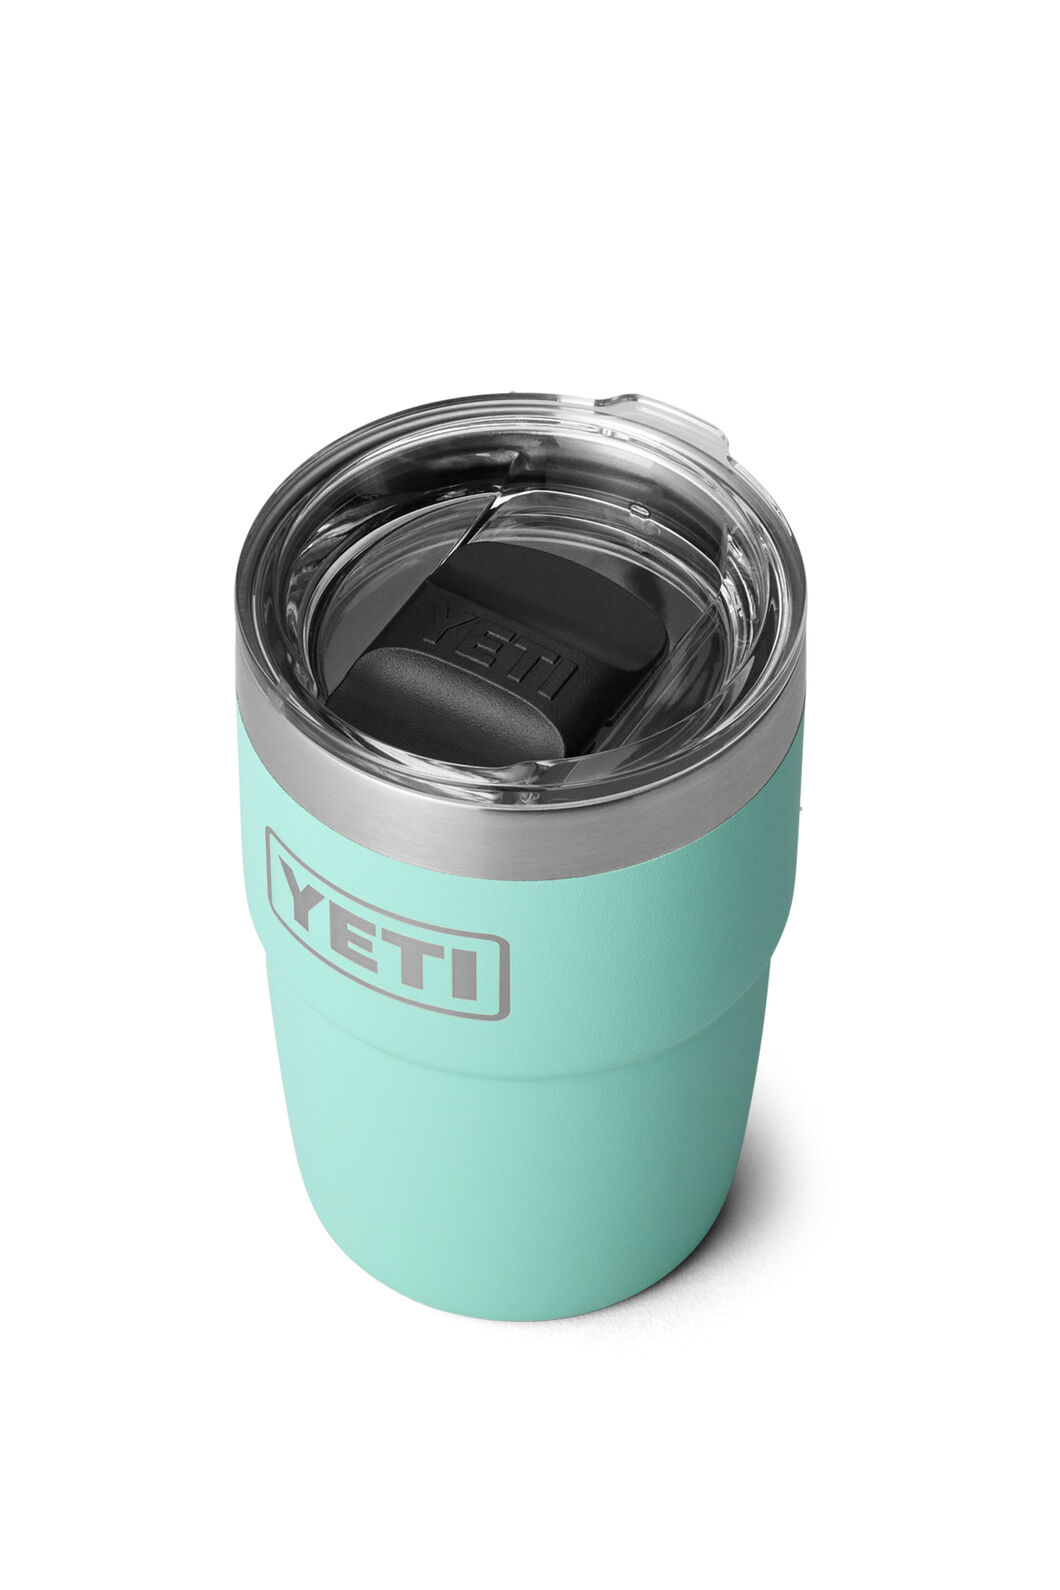 Yeti Rambler 4 oz Stackable Cup, Stainless Steel, Vacuum Insulated Espresso/Coffee Cup, 2 Pack, Seafoam